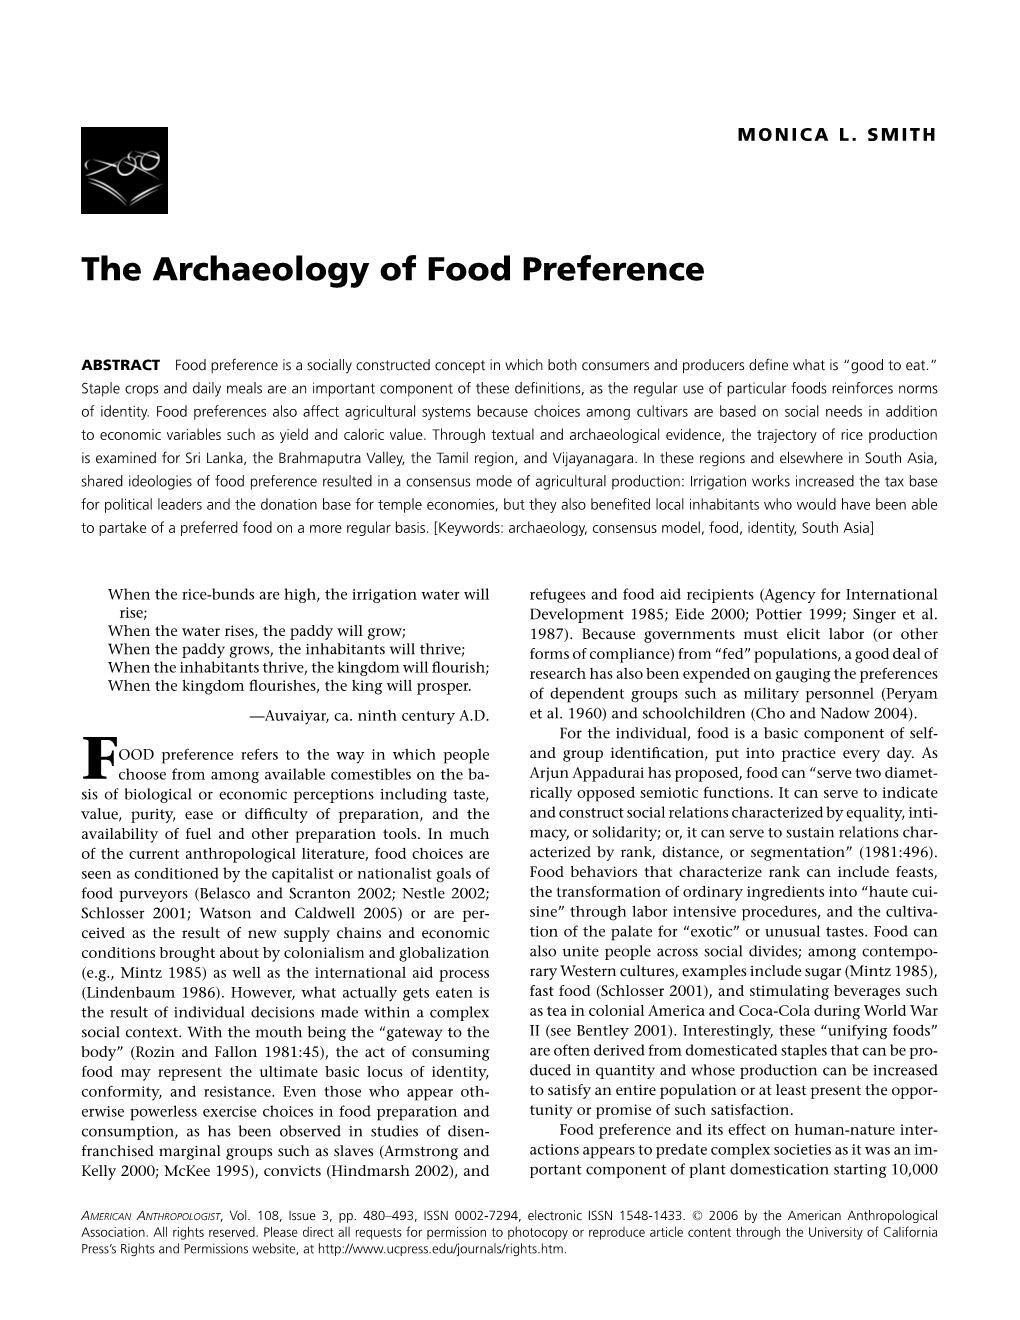 The Archaeology of Food Preference